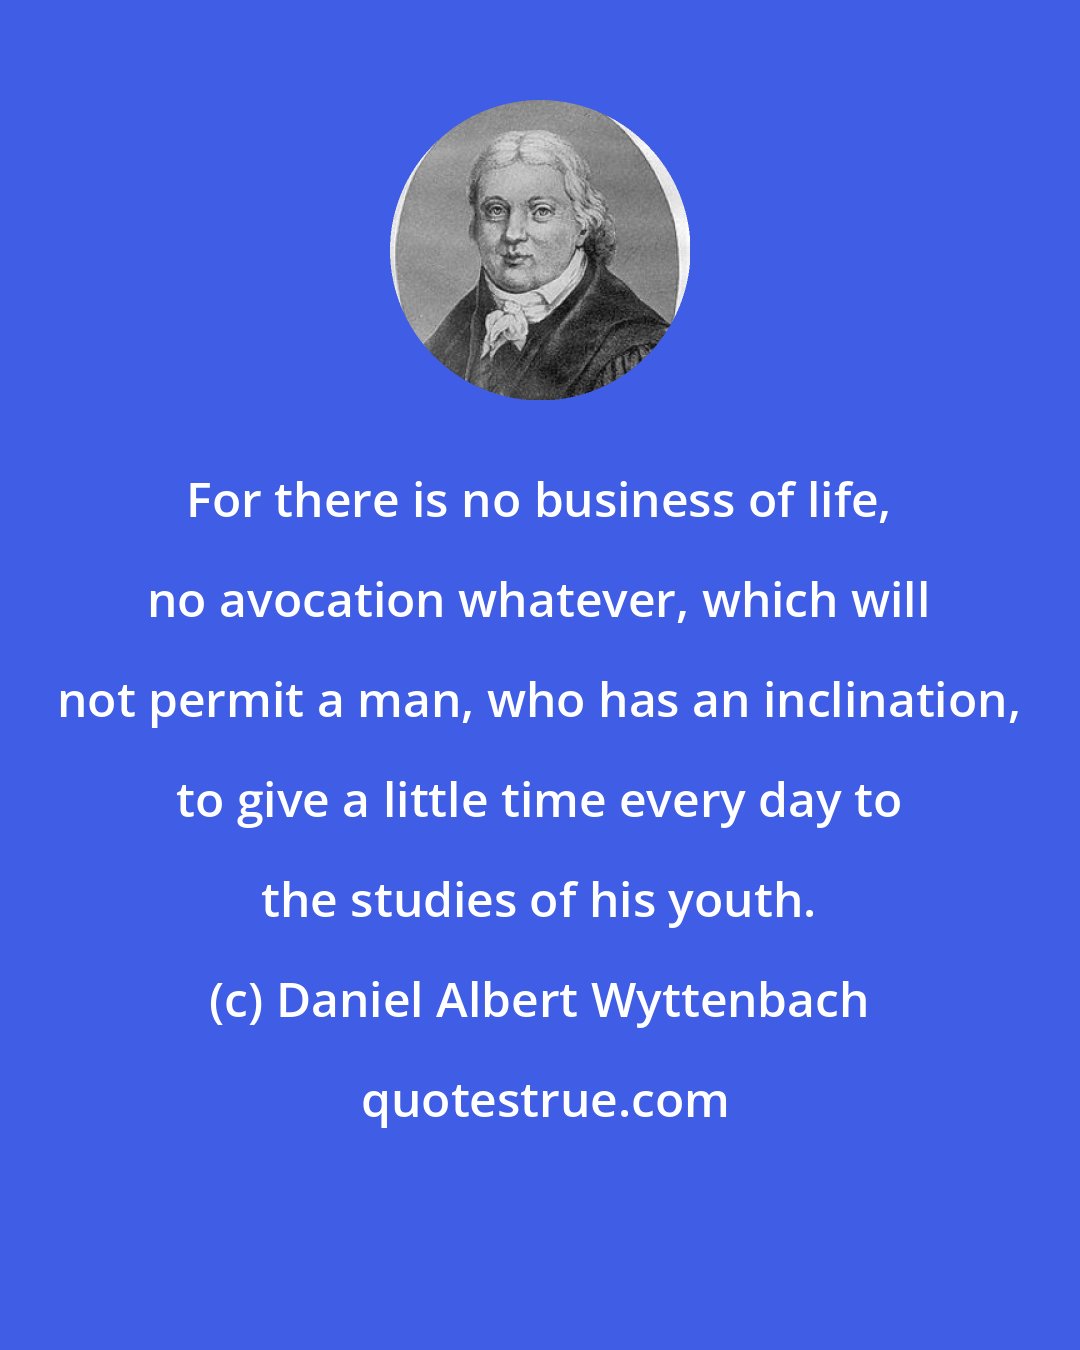 Daniel Albert Wyttenbach: For there is no business of life, no avocation whatever, which will not permit a man, who has an inclination, to give a little time every day to the studies of his youth.